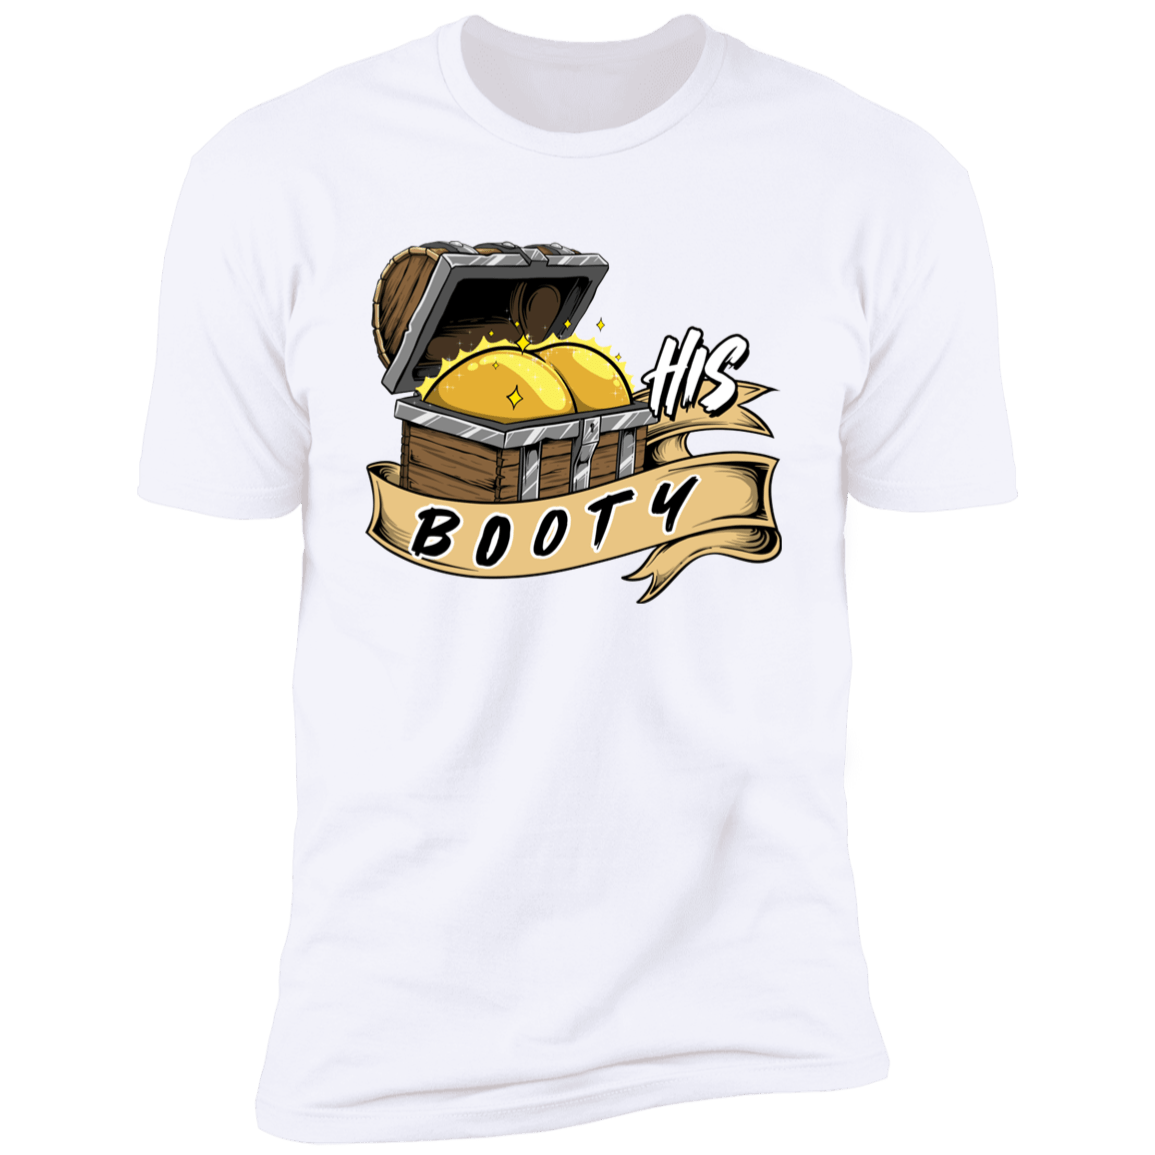 Her Pirate & His Booty Couples Cruise Shirts